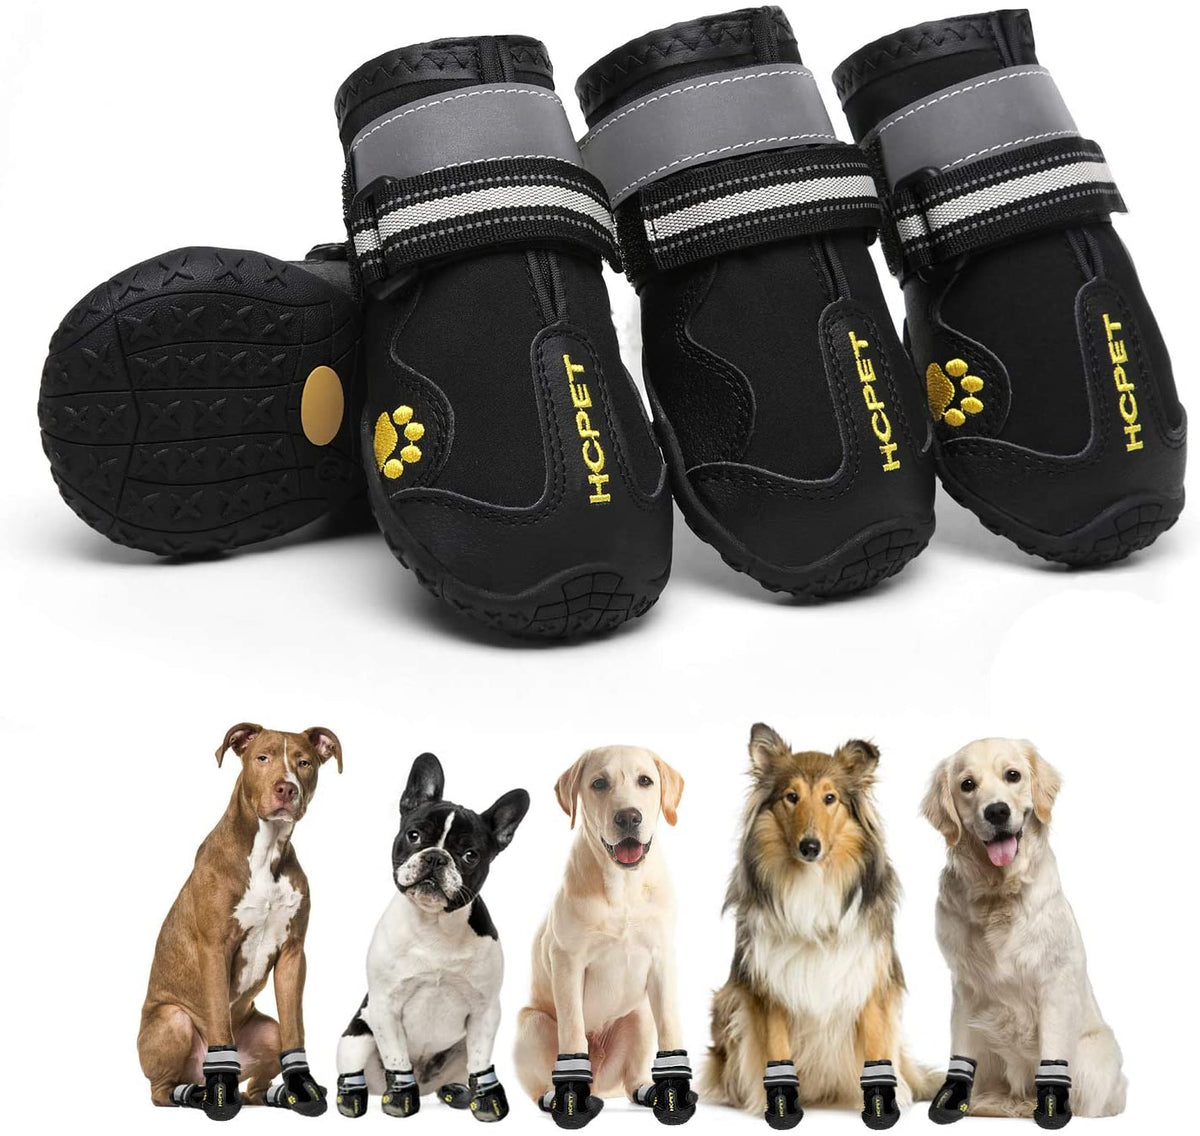 KUTKUT Dog Pack of 4pcs Boots, Waterproof Dog Shoes, Dog Booties with Reflective Rugged Anti-Slip Sole and Skid-Proof, Outdoor Dog Rain Boots for Medium to Large Dogs, Four Ways Stretch Paw Protectors Black-dog shoes-kutkutstyle